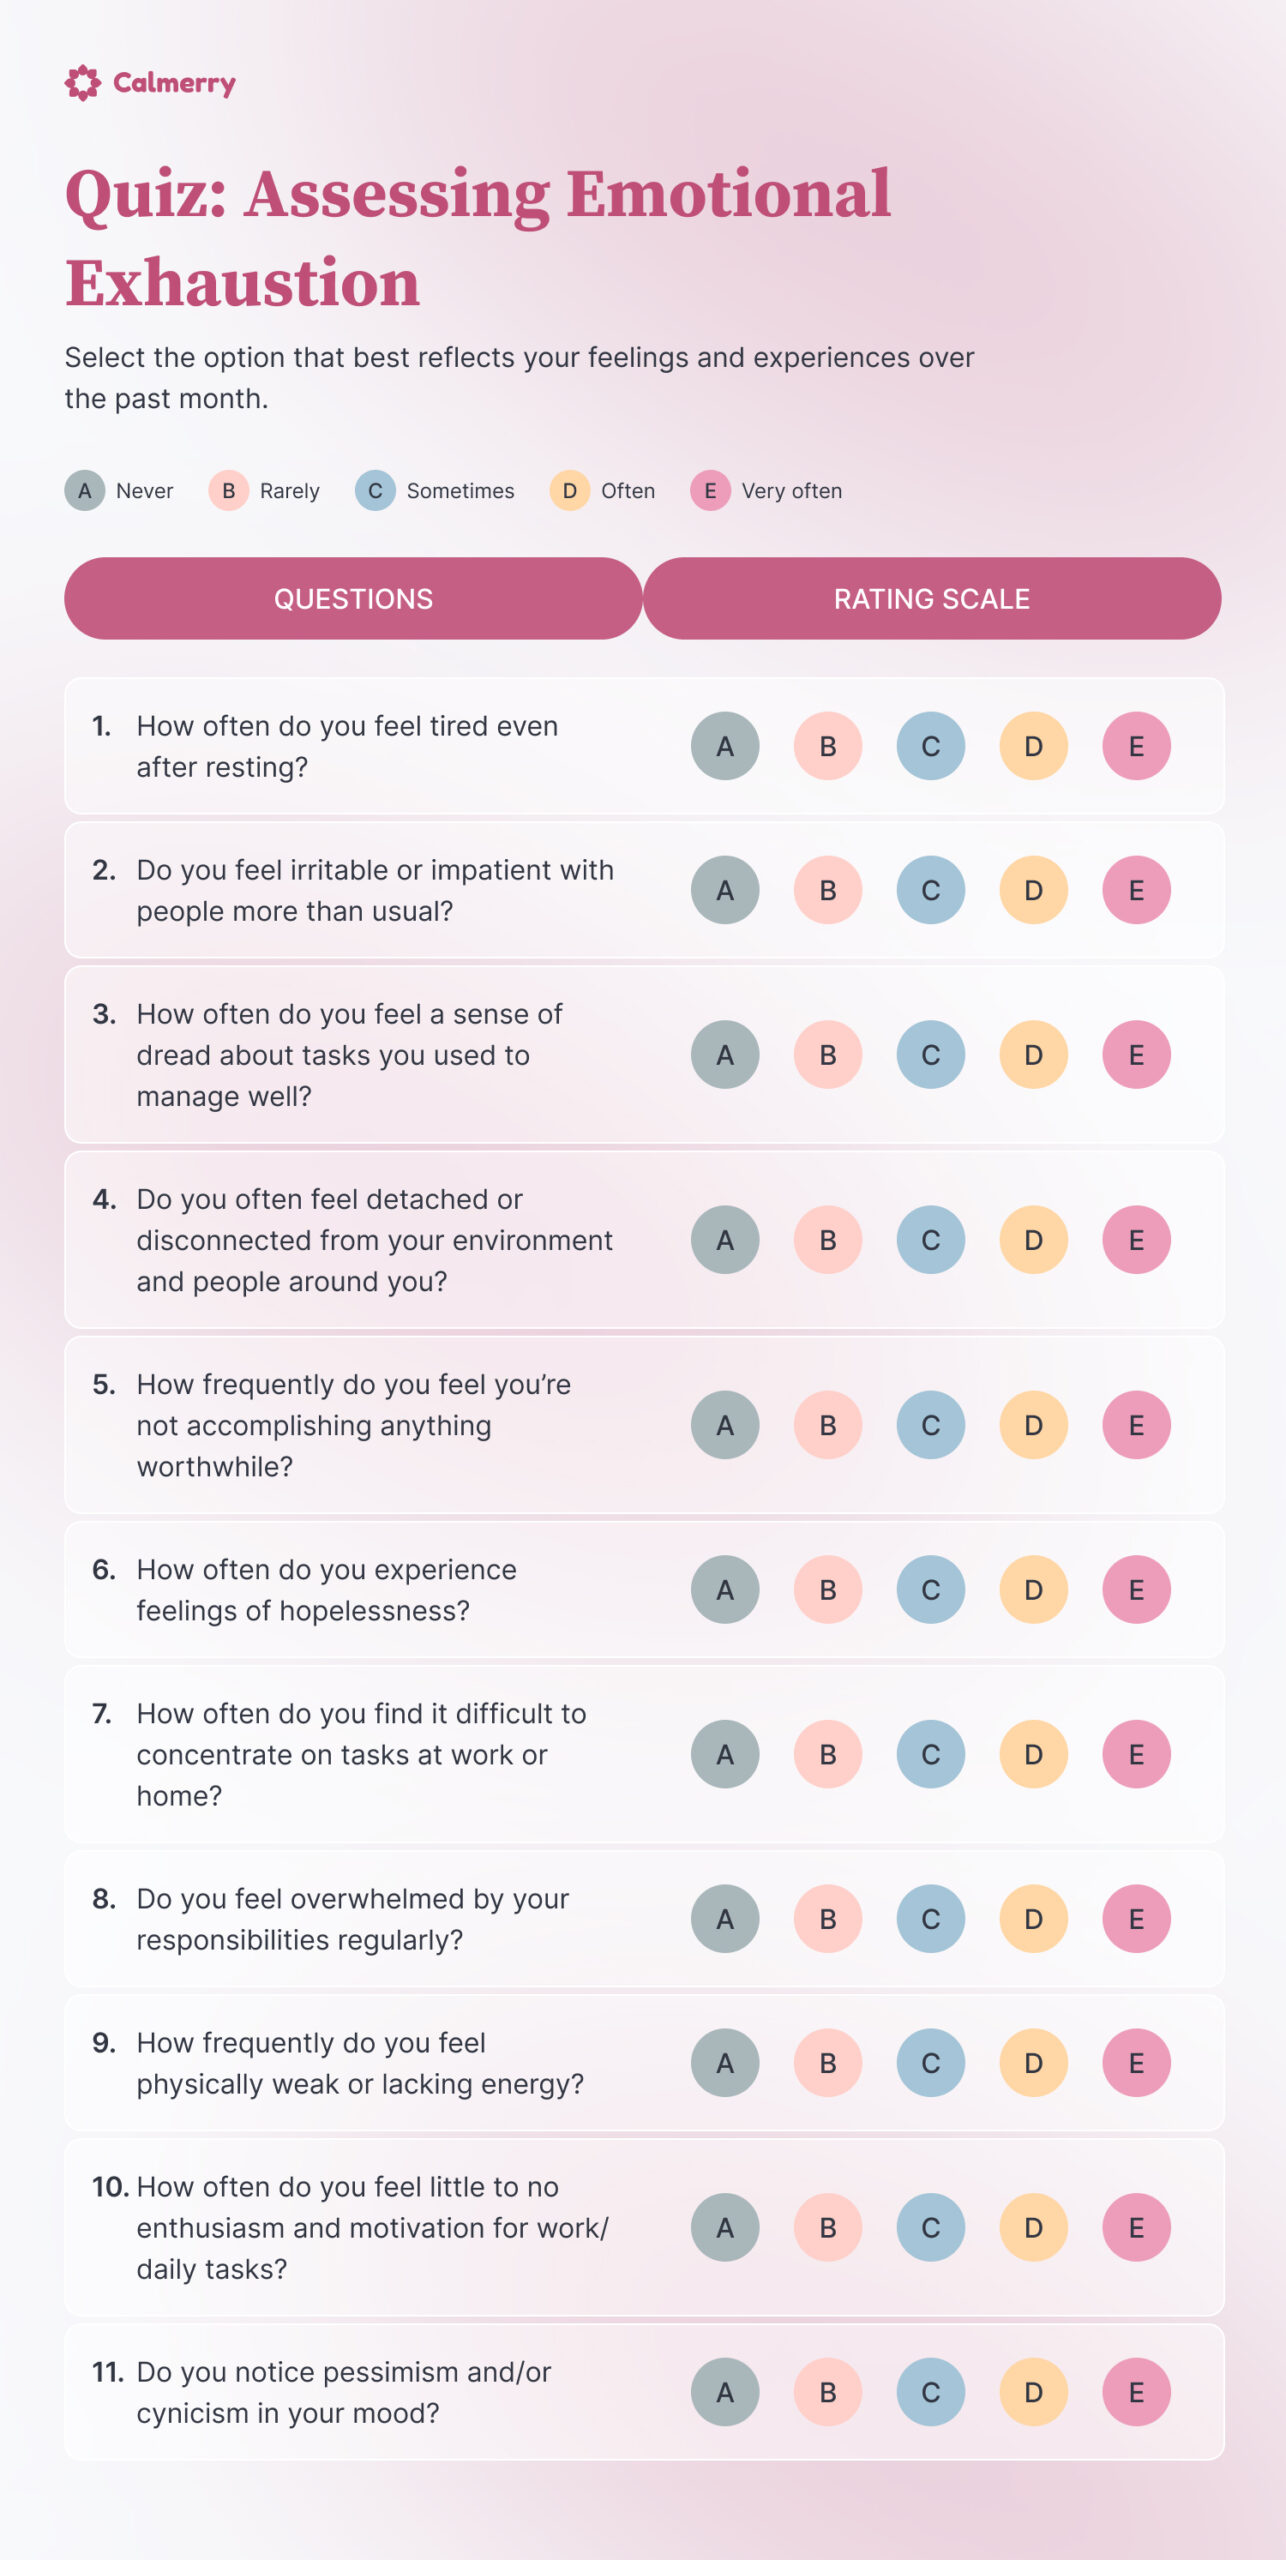 Quiz: Assessing Emotional Exhaustion
Select the option that best reflects your feelings and experiences over the past month.

1) How often do you feel tired even after resting?

A. Never
B. Rarely
C. Sometimes
D. Often
E. Very often

2) Do you feel irritable or impatient with people more than usual?

A. Never
B. Rarely
C. Sometimes
D. Often
E. Very often

3) How often do you feel a sense of dread about tasks you used to manage well?

A. Never
B. Rarely
C. Sometimes
D. Often
E. Very often

4) Do you often feel detached or disconnected from your environment and people around you?

A. Never
B. Rarely
C. Sometimes
D. Often
E. Very often

5) How frequently do you feel you’re not accomplishing anything worthwhile?

A. Never
B. Rarely
C. Sometimes
D. Often
E. Very often

6) How often do you experience feelings of hopelessness?

A. Never
B. Rarely
C. Sometimes
D. Often
E. Very often

7) How often do you find it difficult to concentrate on tasks at work or home?

A. Never
B. Rarely
C. Sometimes
D. Often
E. Very often

8) Do you feel overwhelmed by your responsibilities regularly?

A. Never
B. Rarely
C. Sometimes
D. Often
E. Very often

9) How frequently do you feel physically weak or lacking energy?

A. Never
B. Rarely
C. Sometimes
D. Often
E. Very often

10) How often do you feel little to no enthusiasm and motivation for work/daily tasks?

A. Never
B. Rarely
C. Sometimes
D. Often
E. Very often

11) Do you notice pessimism and/or cynicism in your mood?

A. Never
B. Rarely
C. Sometimes
D. Often
E. Very often
